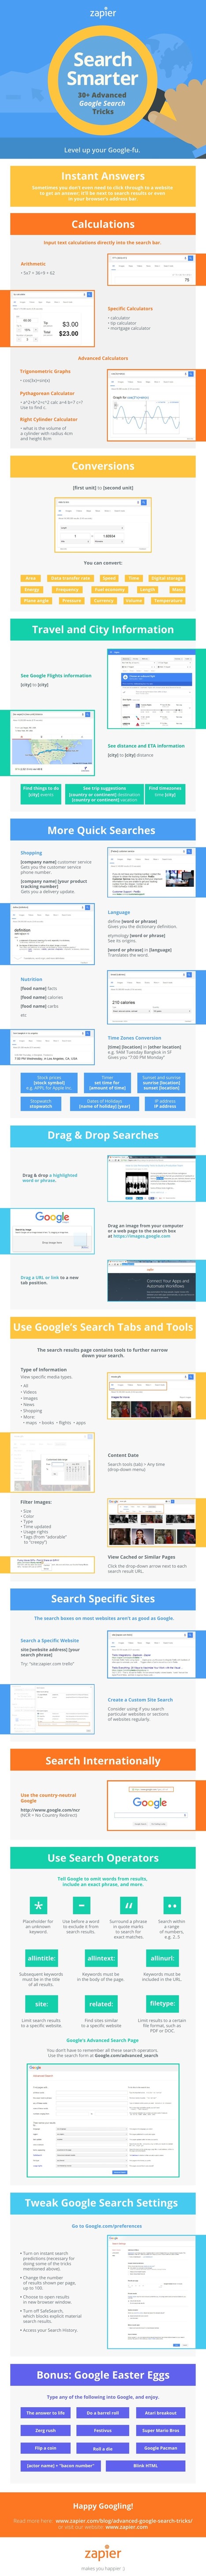 A New Infographic Featuring 30+ Practical Google Search Tips ~ Educational Technology and Mobile Learning | Information and digital literacy in education via the digital path | Scoop.it